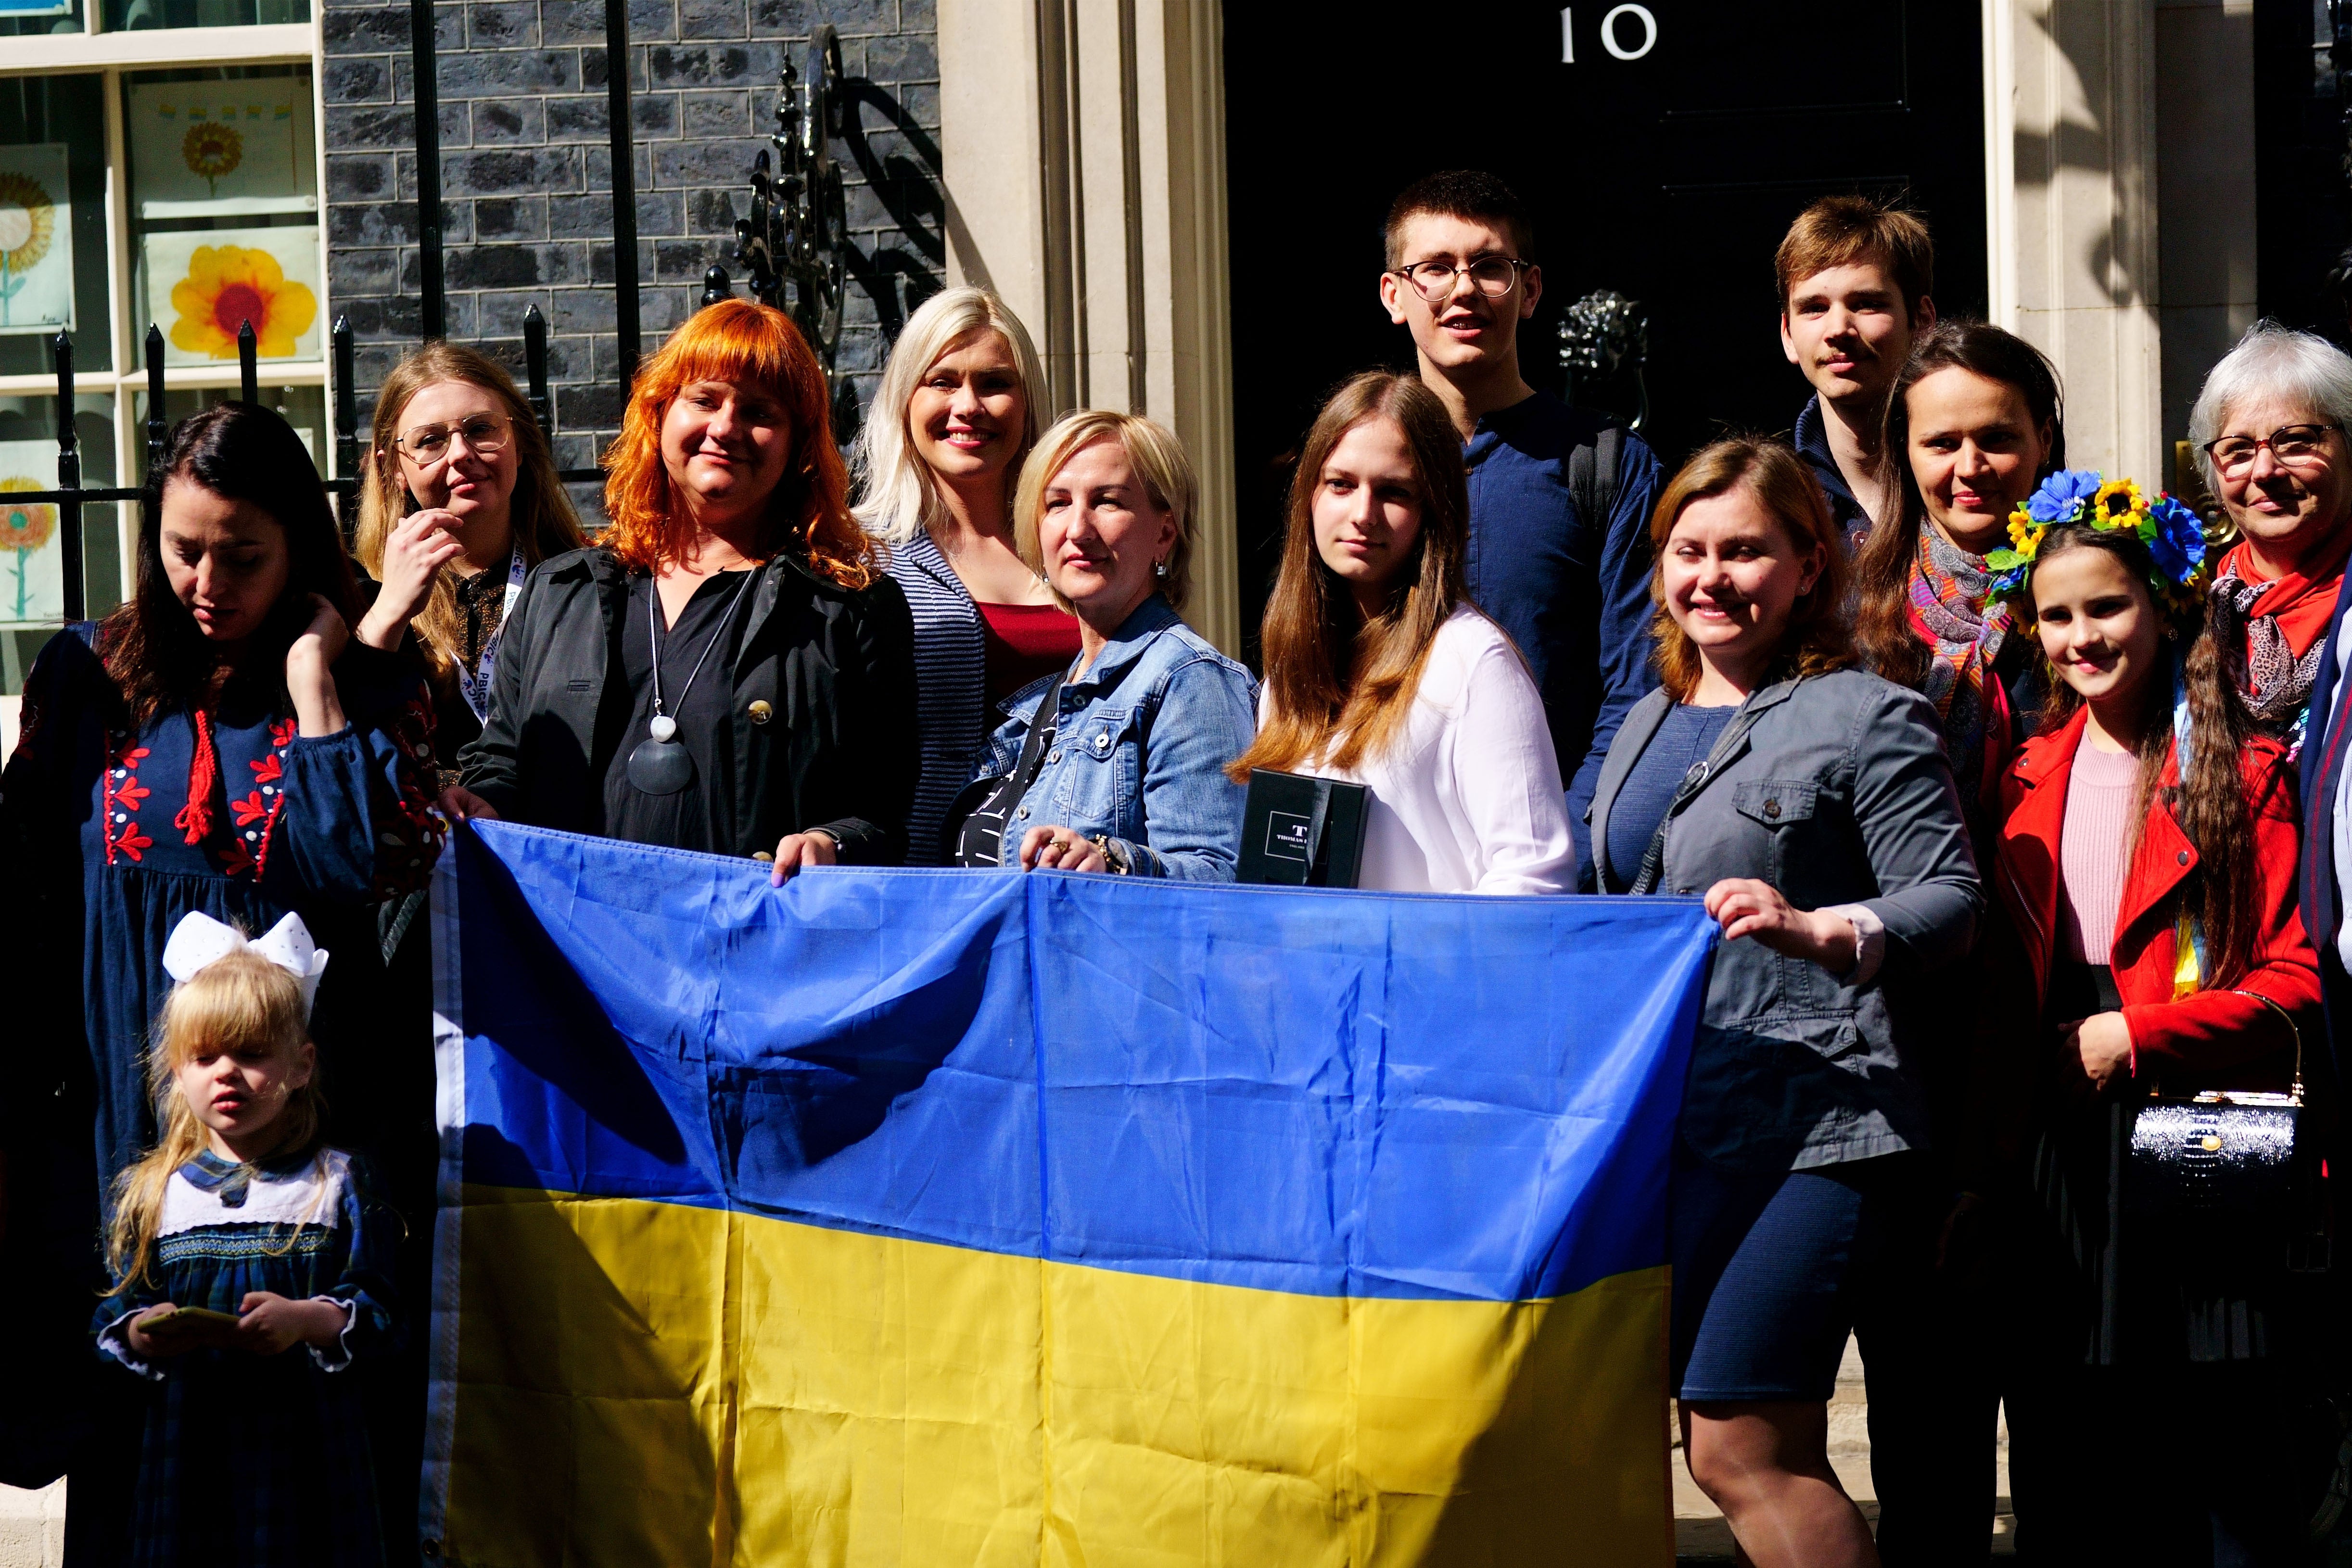 A number of Ukrainian families stand on the doorstep of 10 Downing Street